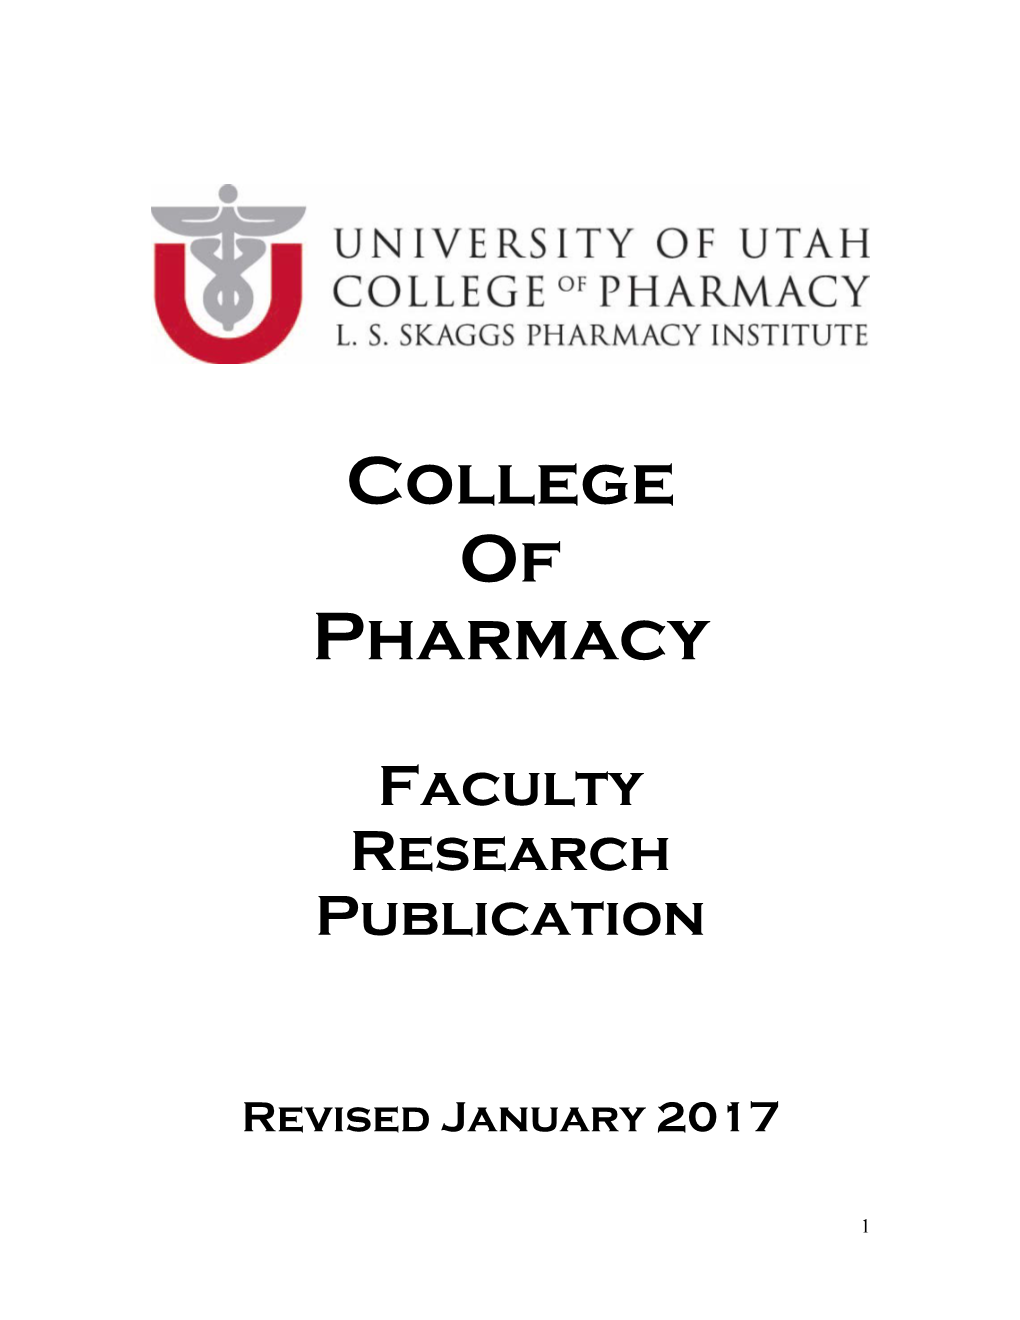 Faculty in Pharmacotherapy